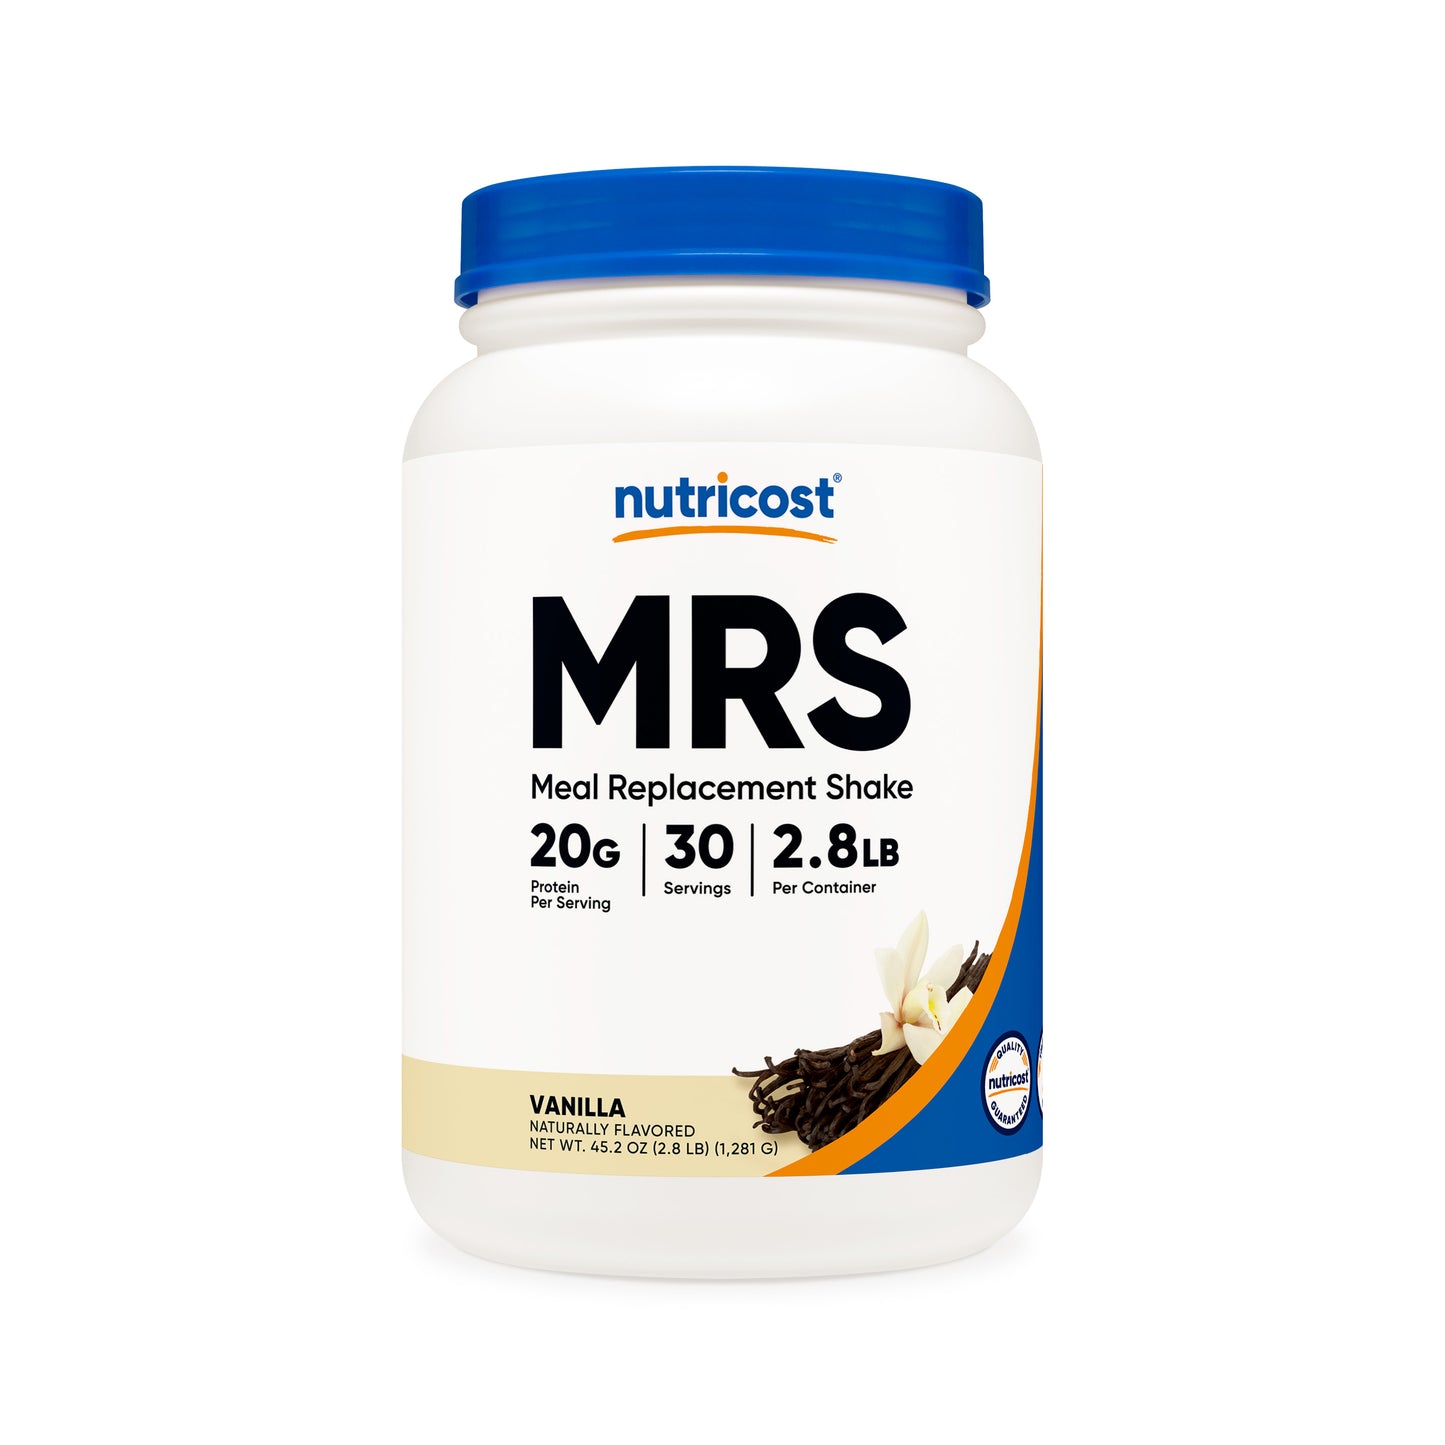 Nutricost Meal Replacement Shakes